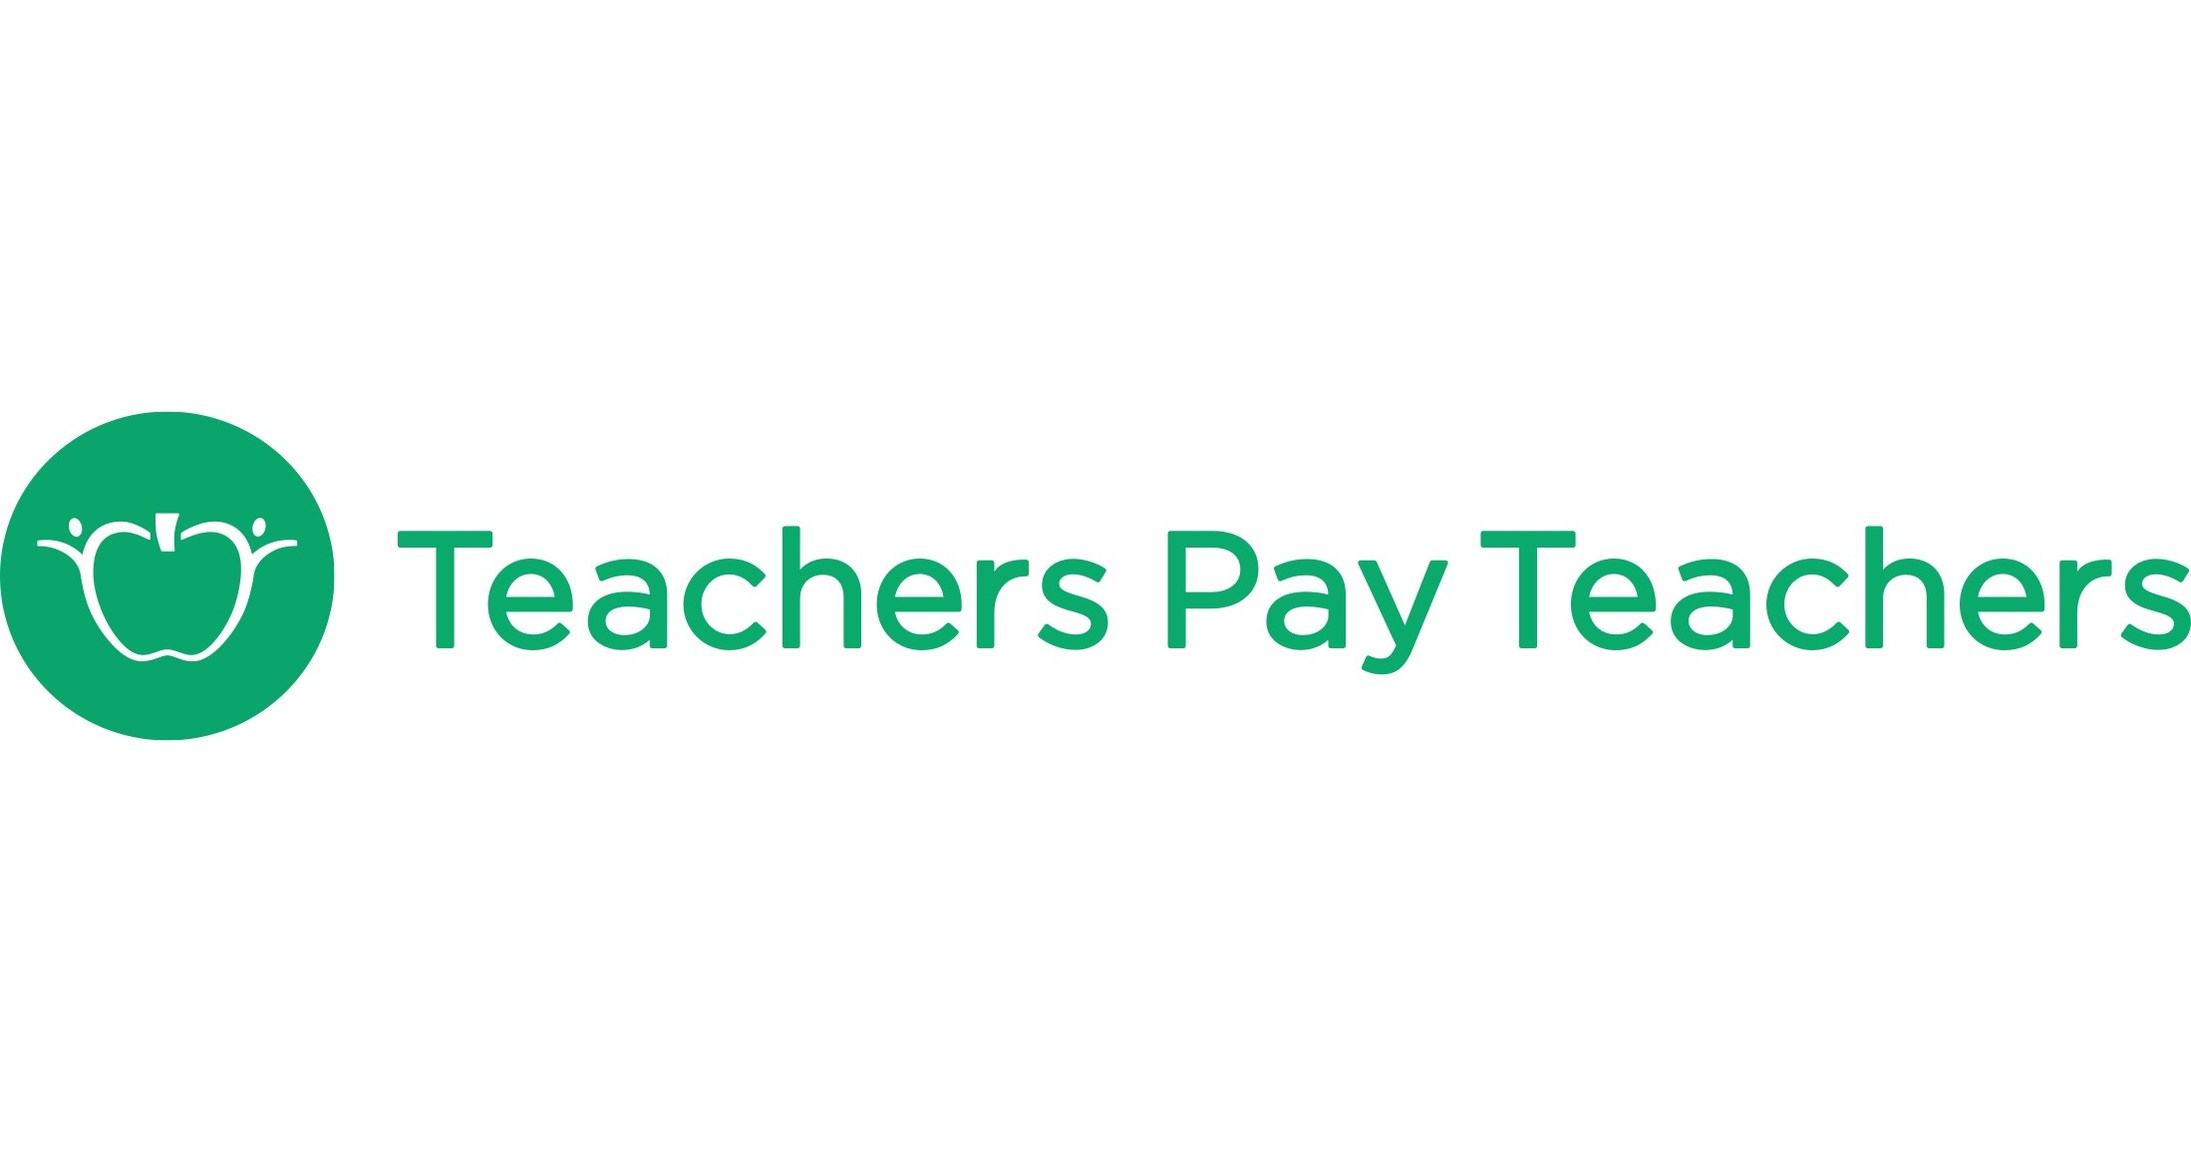 TEACHERS PAY TEACHERS (TPT) ACQUIRES BAKPAX, THE AUTOMATED GRADING  PLATFORM, EXPANDING ITS DIGITAL CREATION AND ASSESSMENT TOOLS FOR TEACHERS